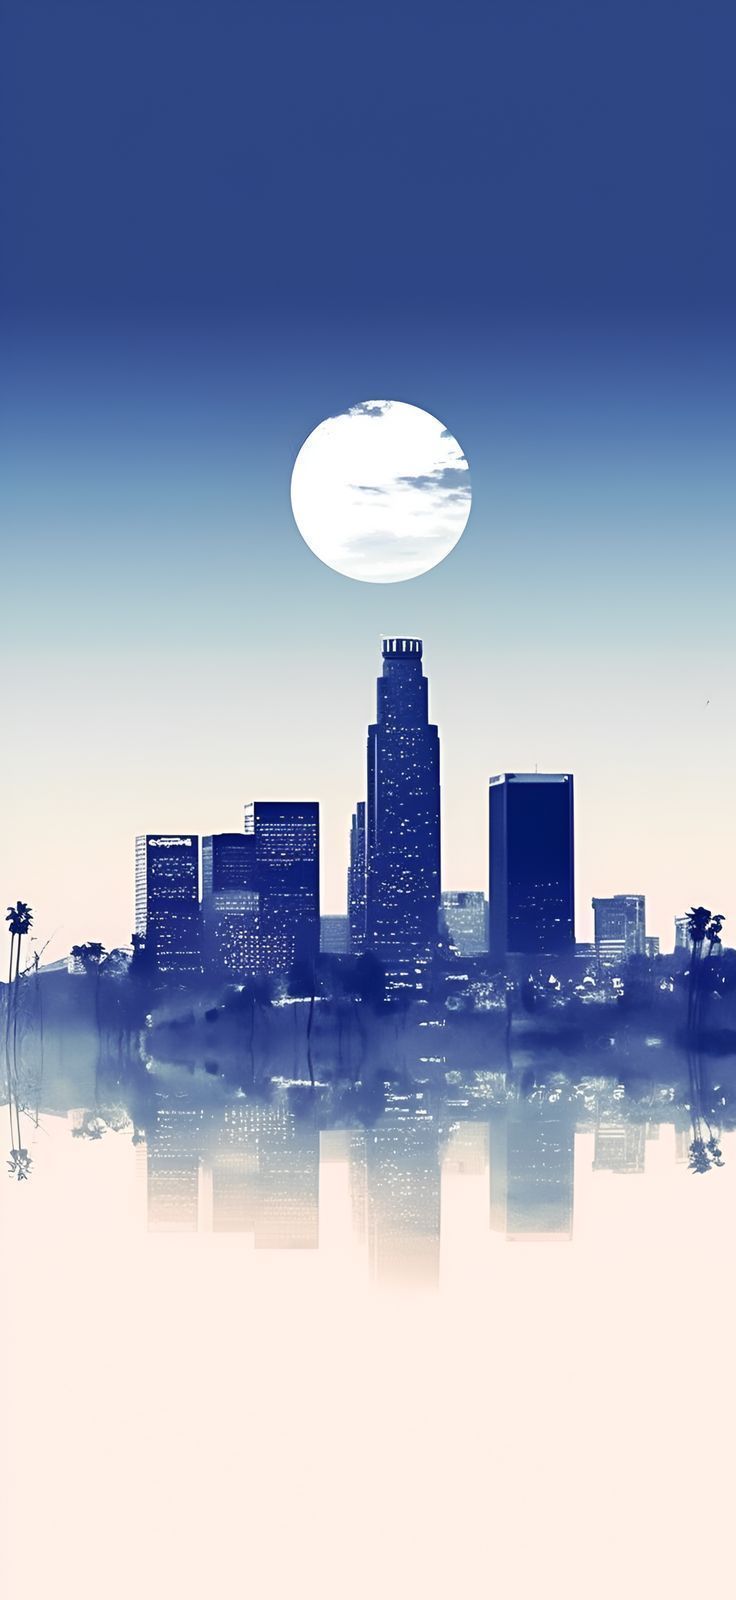 Aesthetic Wallpaper iPhone and Android Optimized: Minimalist Los Angeles Skyline in Tranquil Blue. Los angeles skyline, Aesthetic wallpaper, Wallpaper